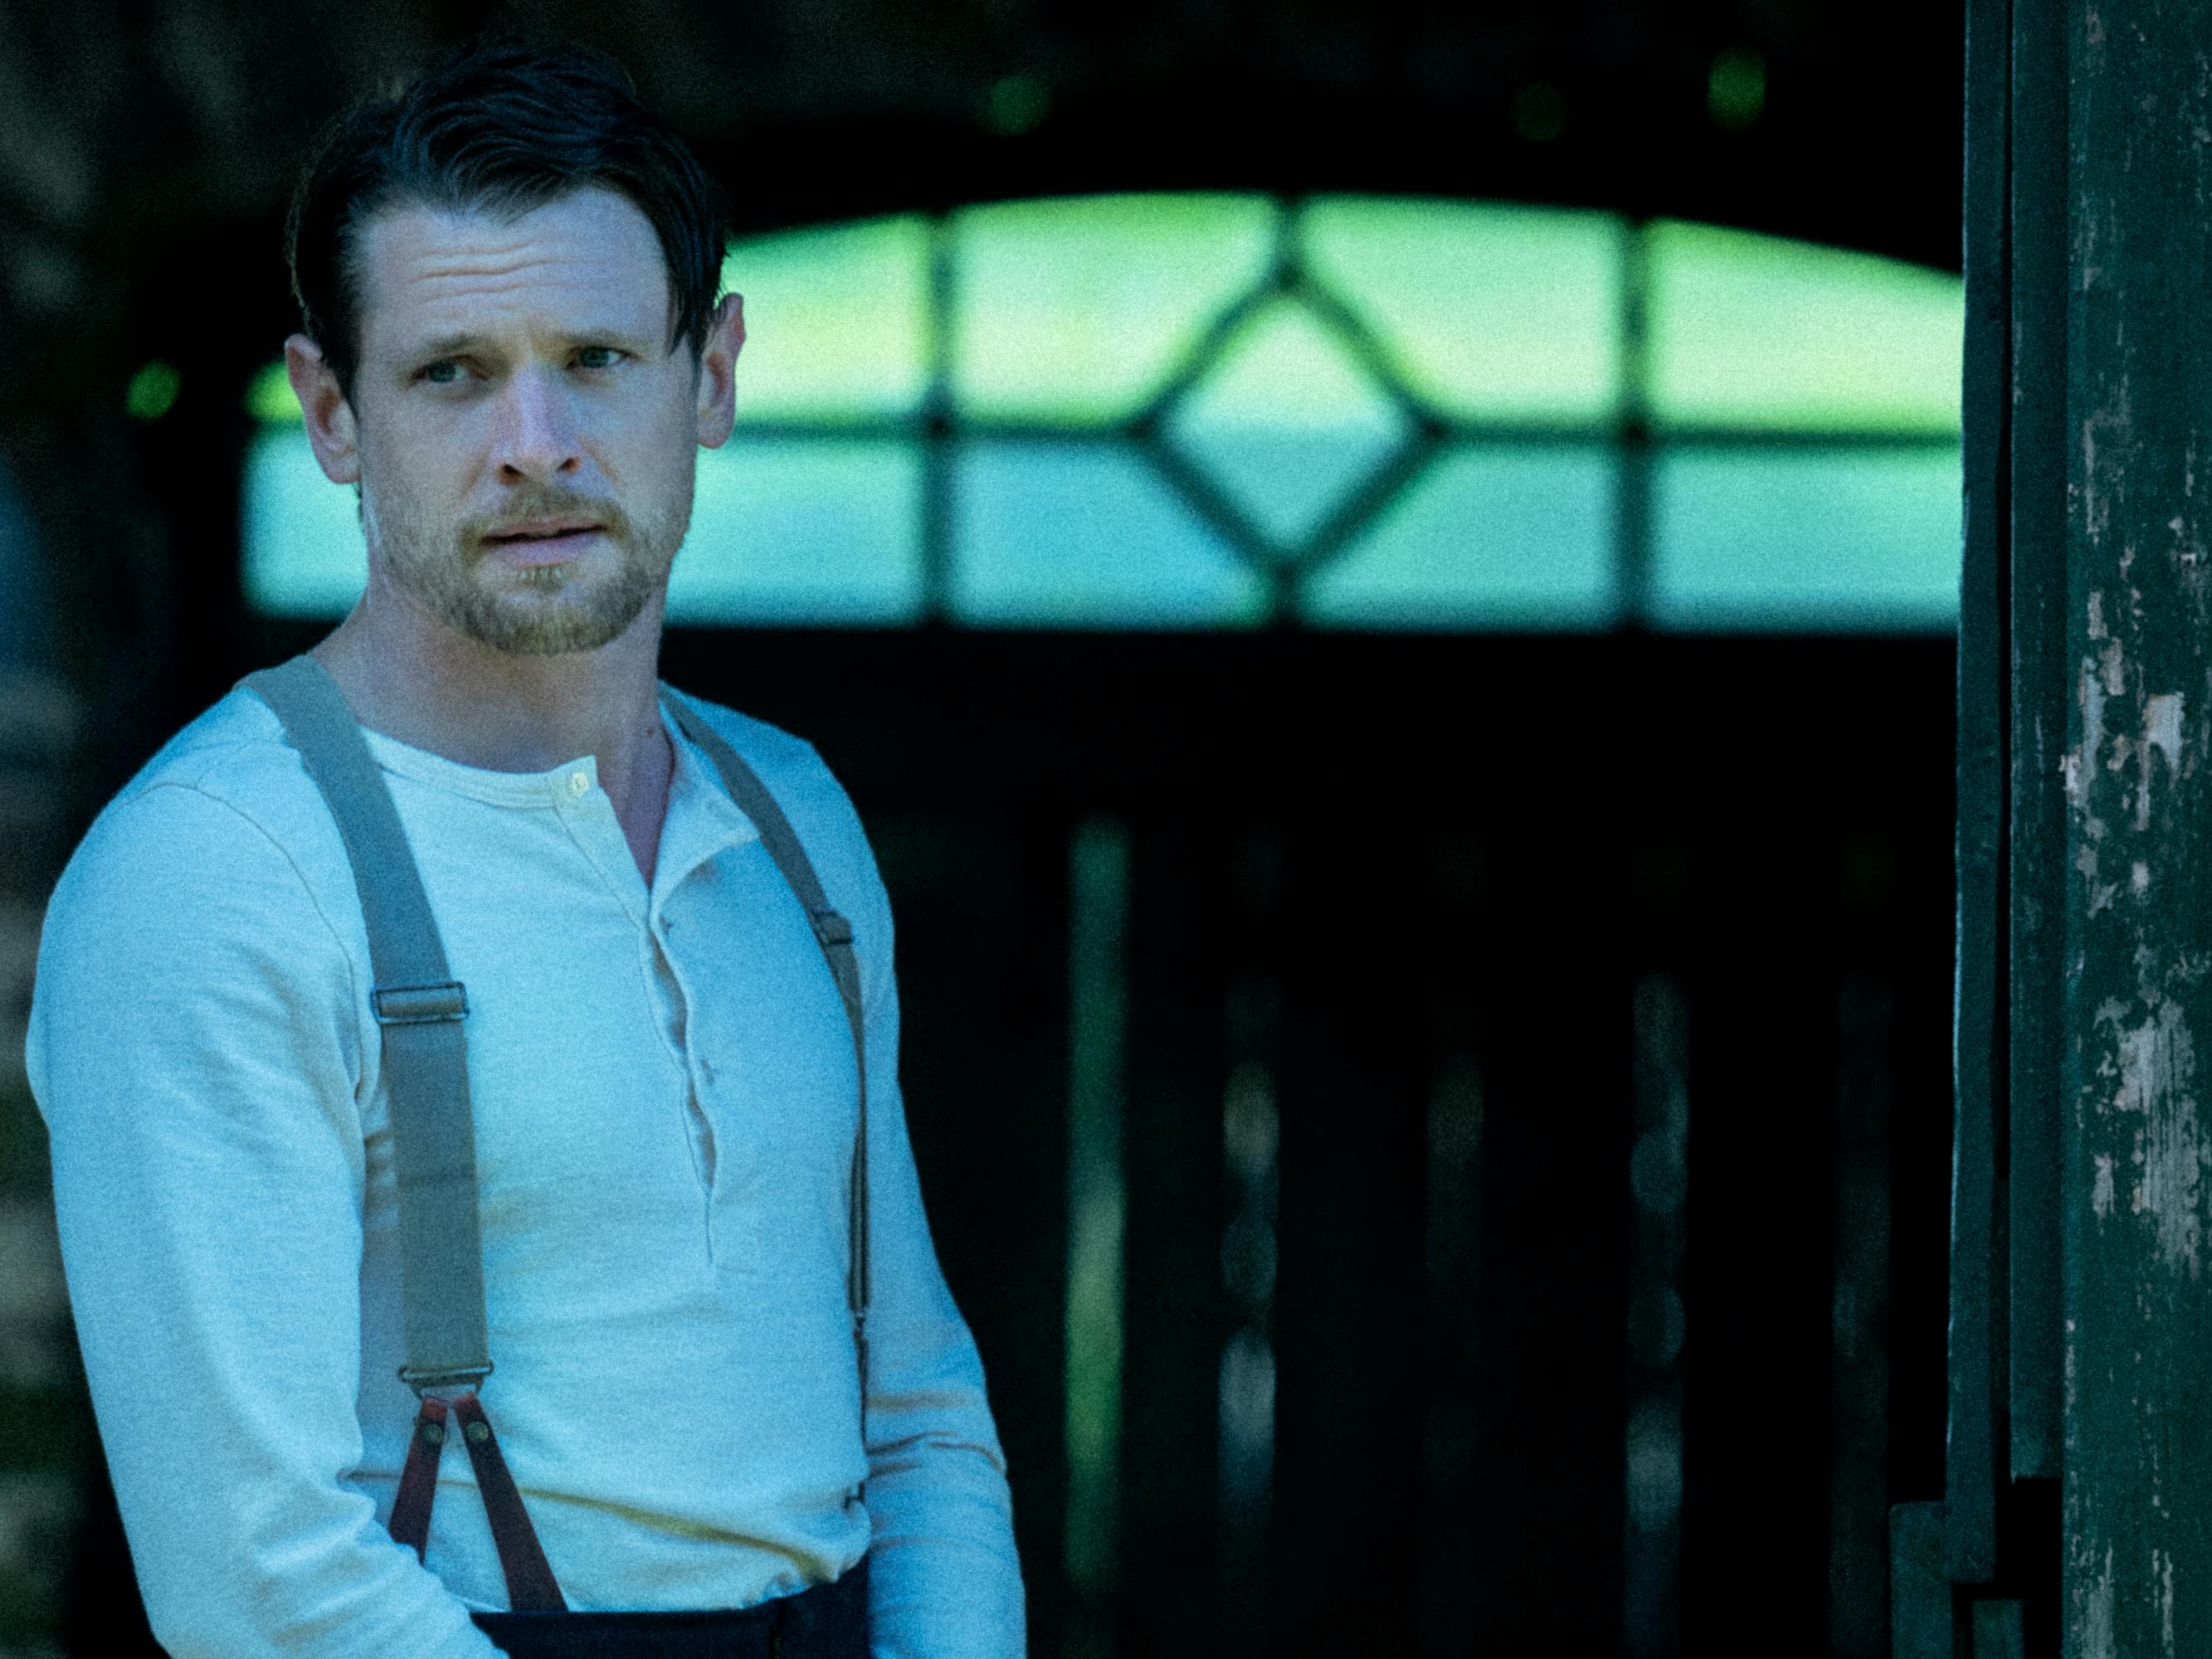 Oliver Mellors (Jack O'Connell) wears a white shirt and suspenders.